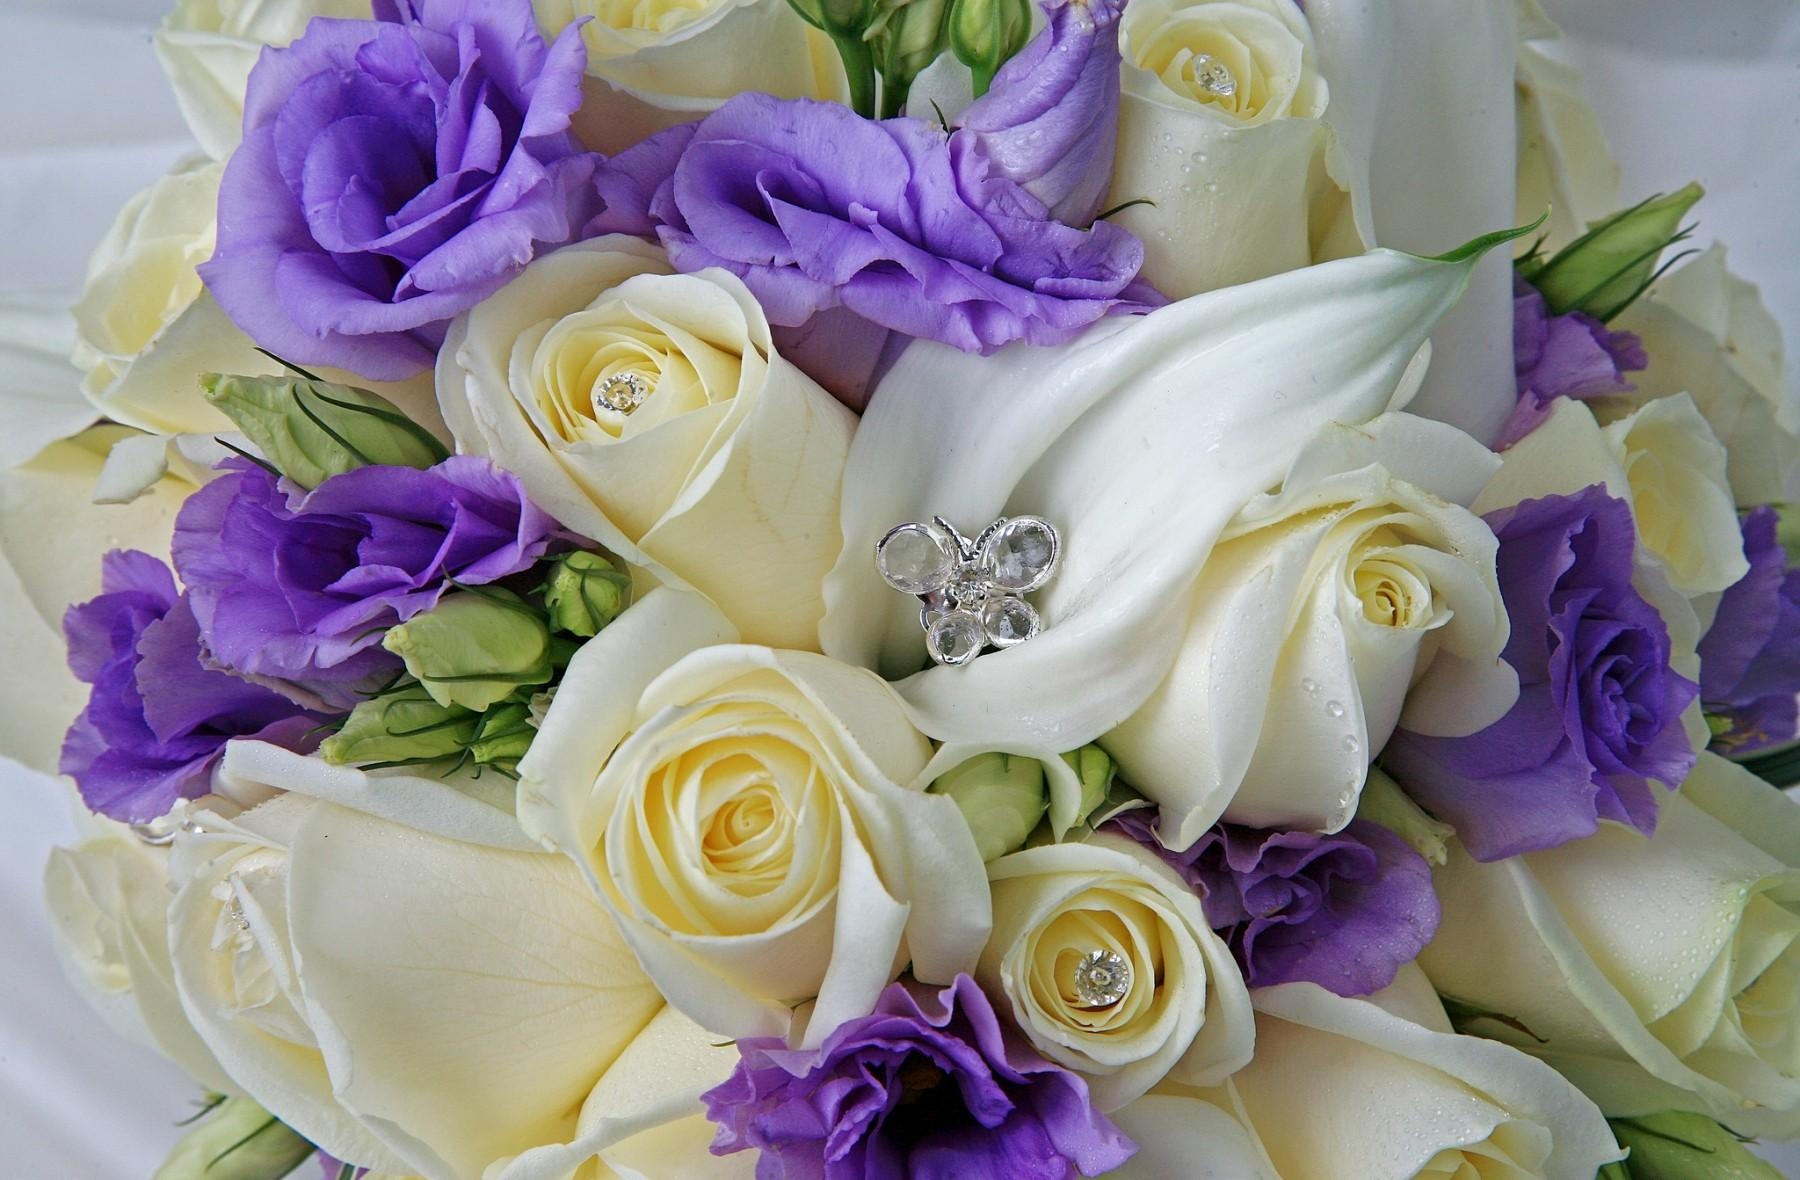 drops, roses, flowers, decorations, bouquet, lisianthus russell, lisiantus russell 5K